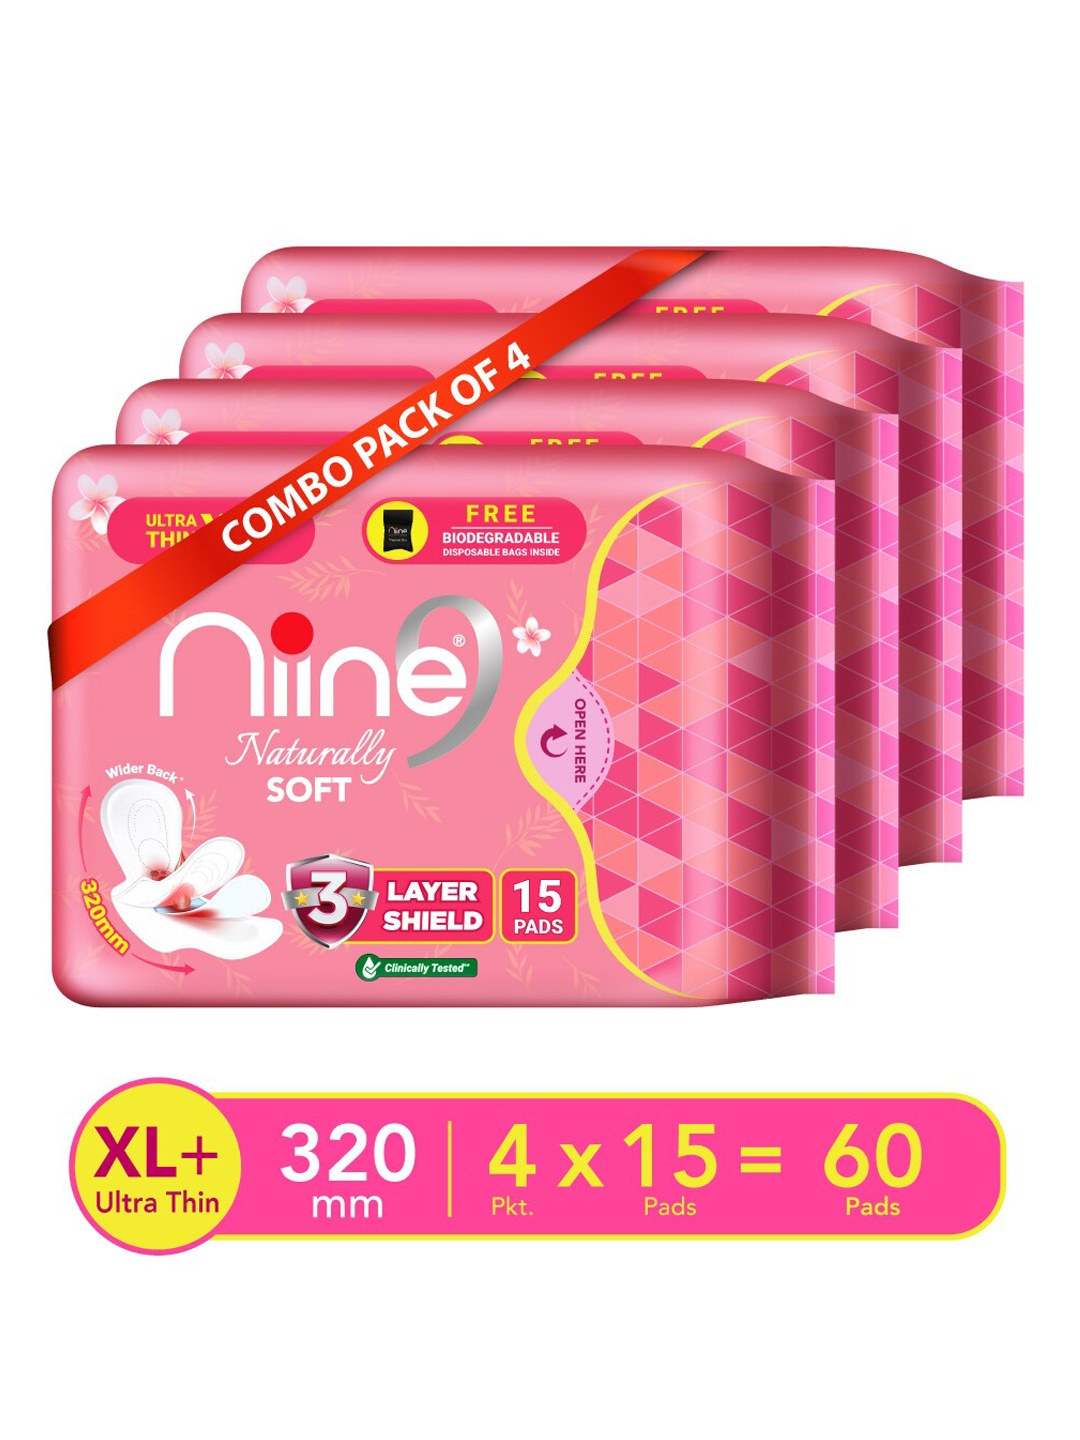 

Niine Set of 4 Naturally Soft Ultra Thin XL+ Sanitary Napkins for Heavy Flow-15 Pads Each, White